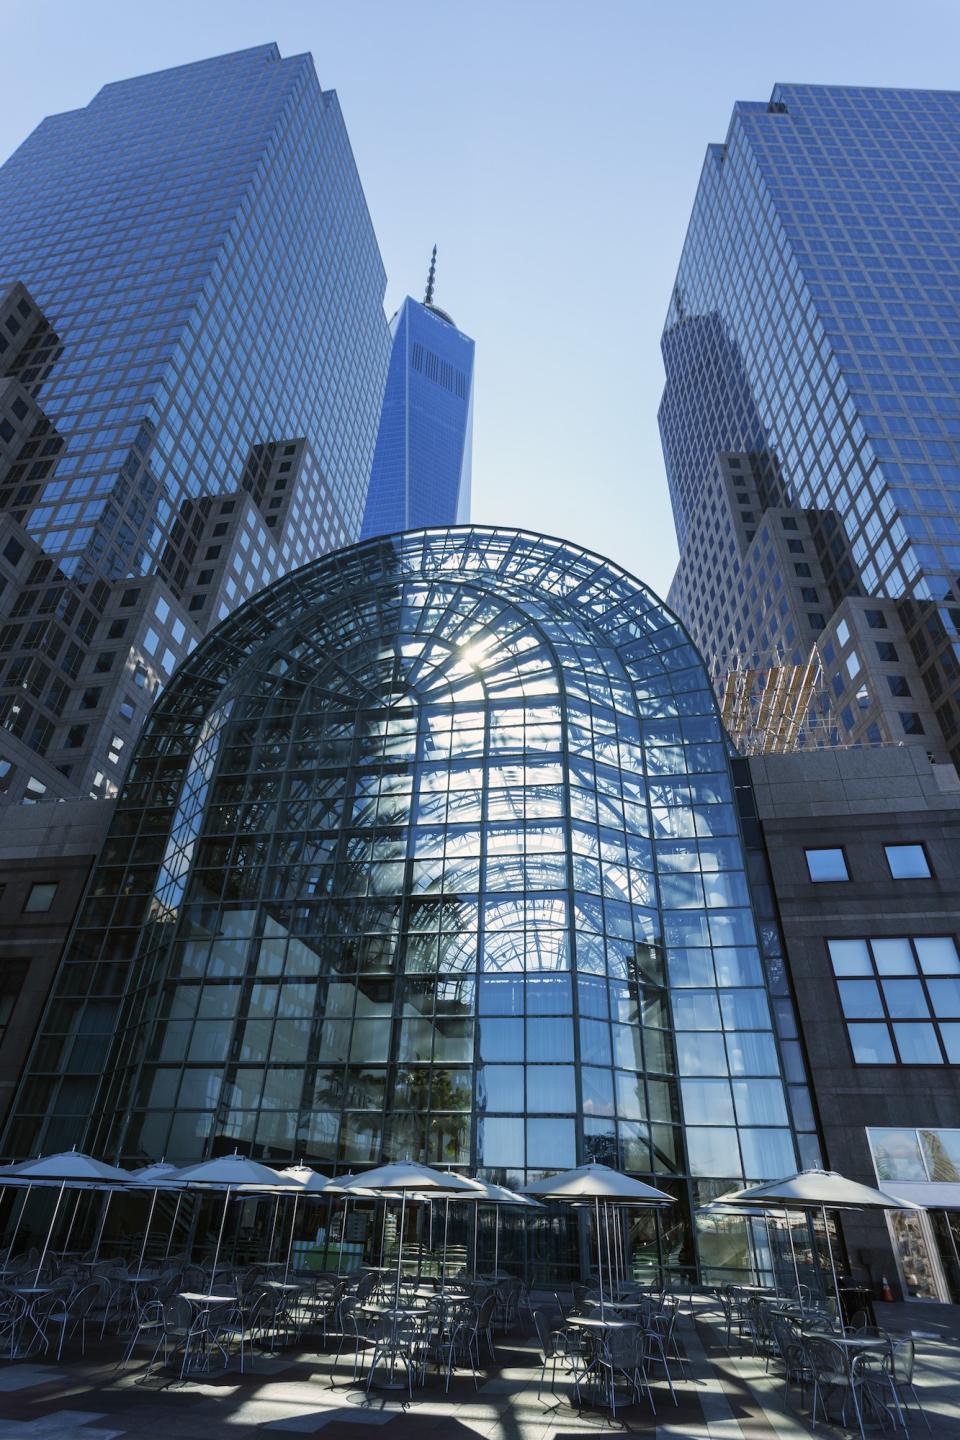 Designed by César Pelli, The World Financial Center (now Brookfield Place), required significant repair after the attacks in New York City on September 11, 2001.